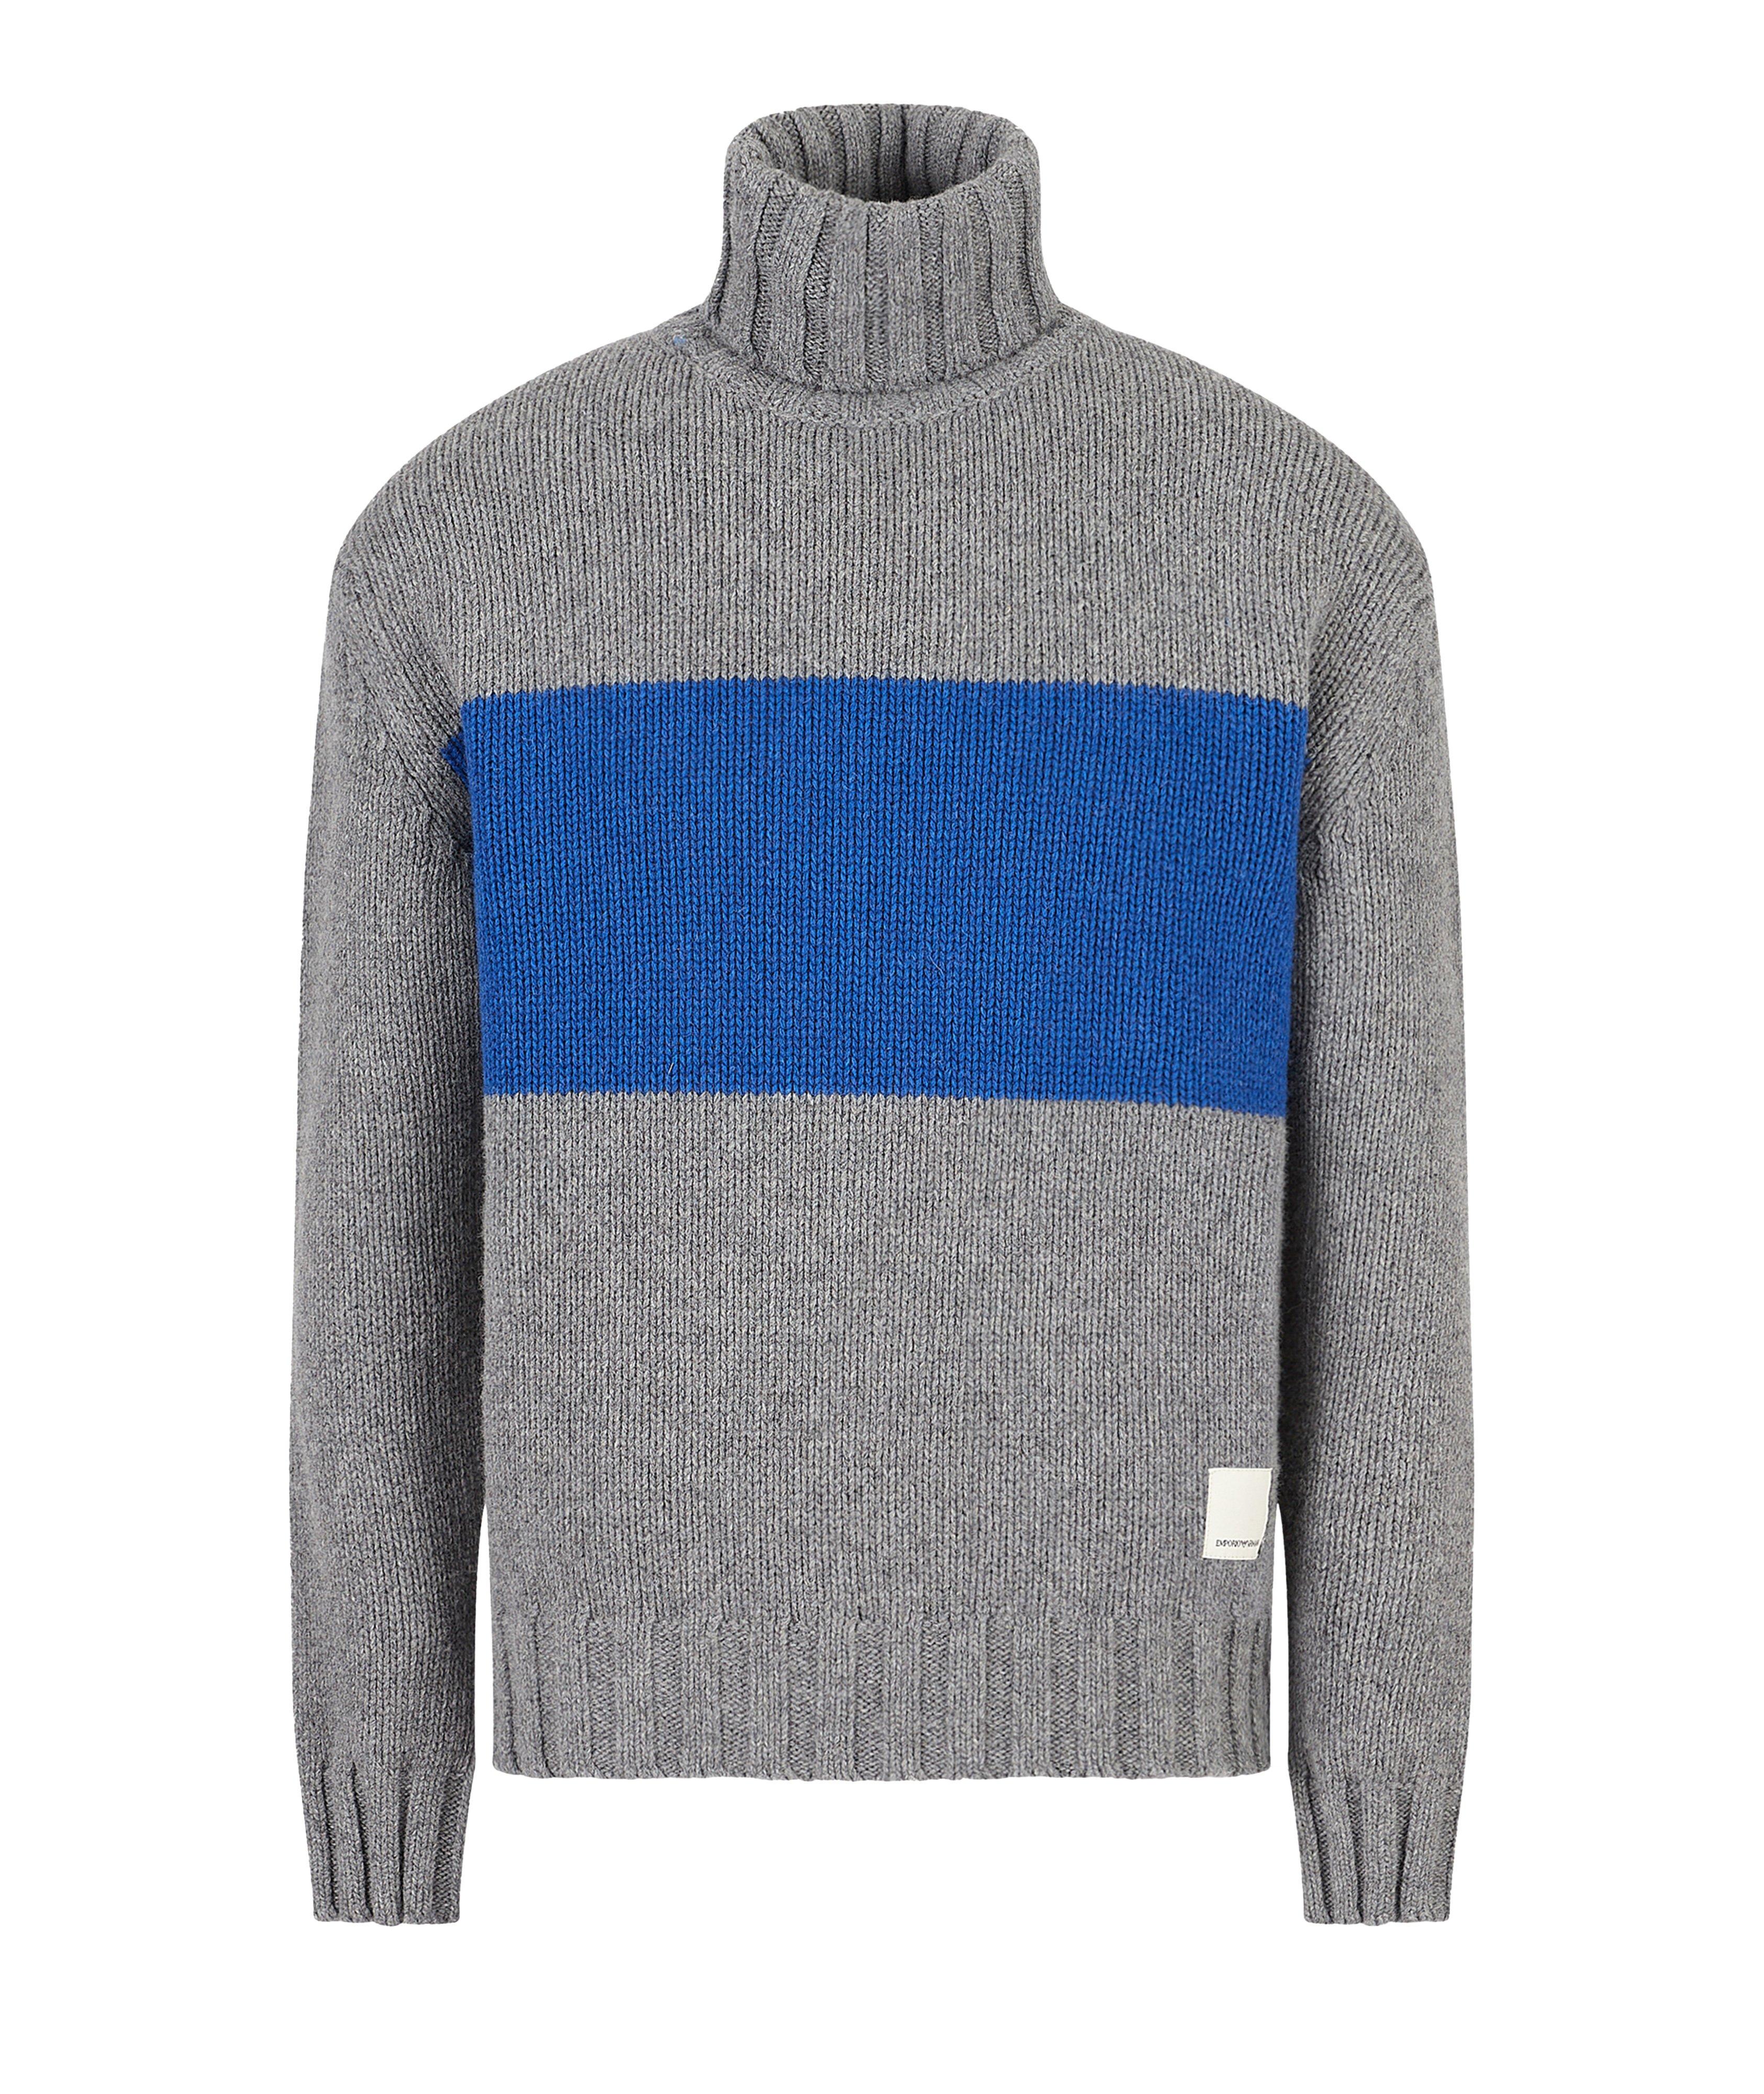 EArctic Sustainable Collection Striped Wool-Blend Knit Turtleneck image 0